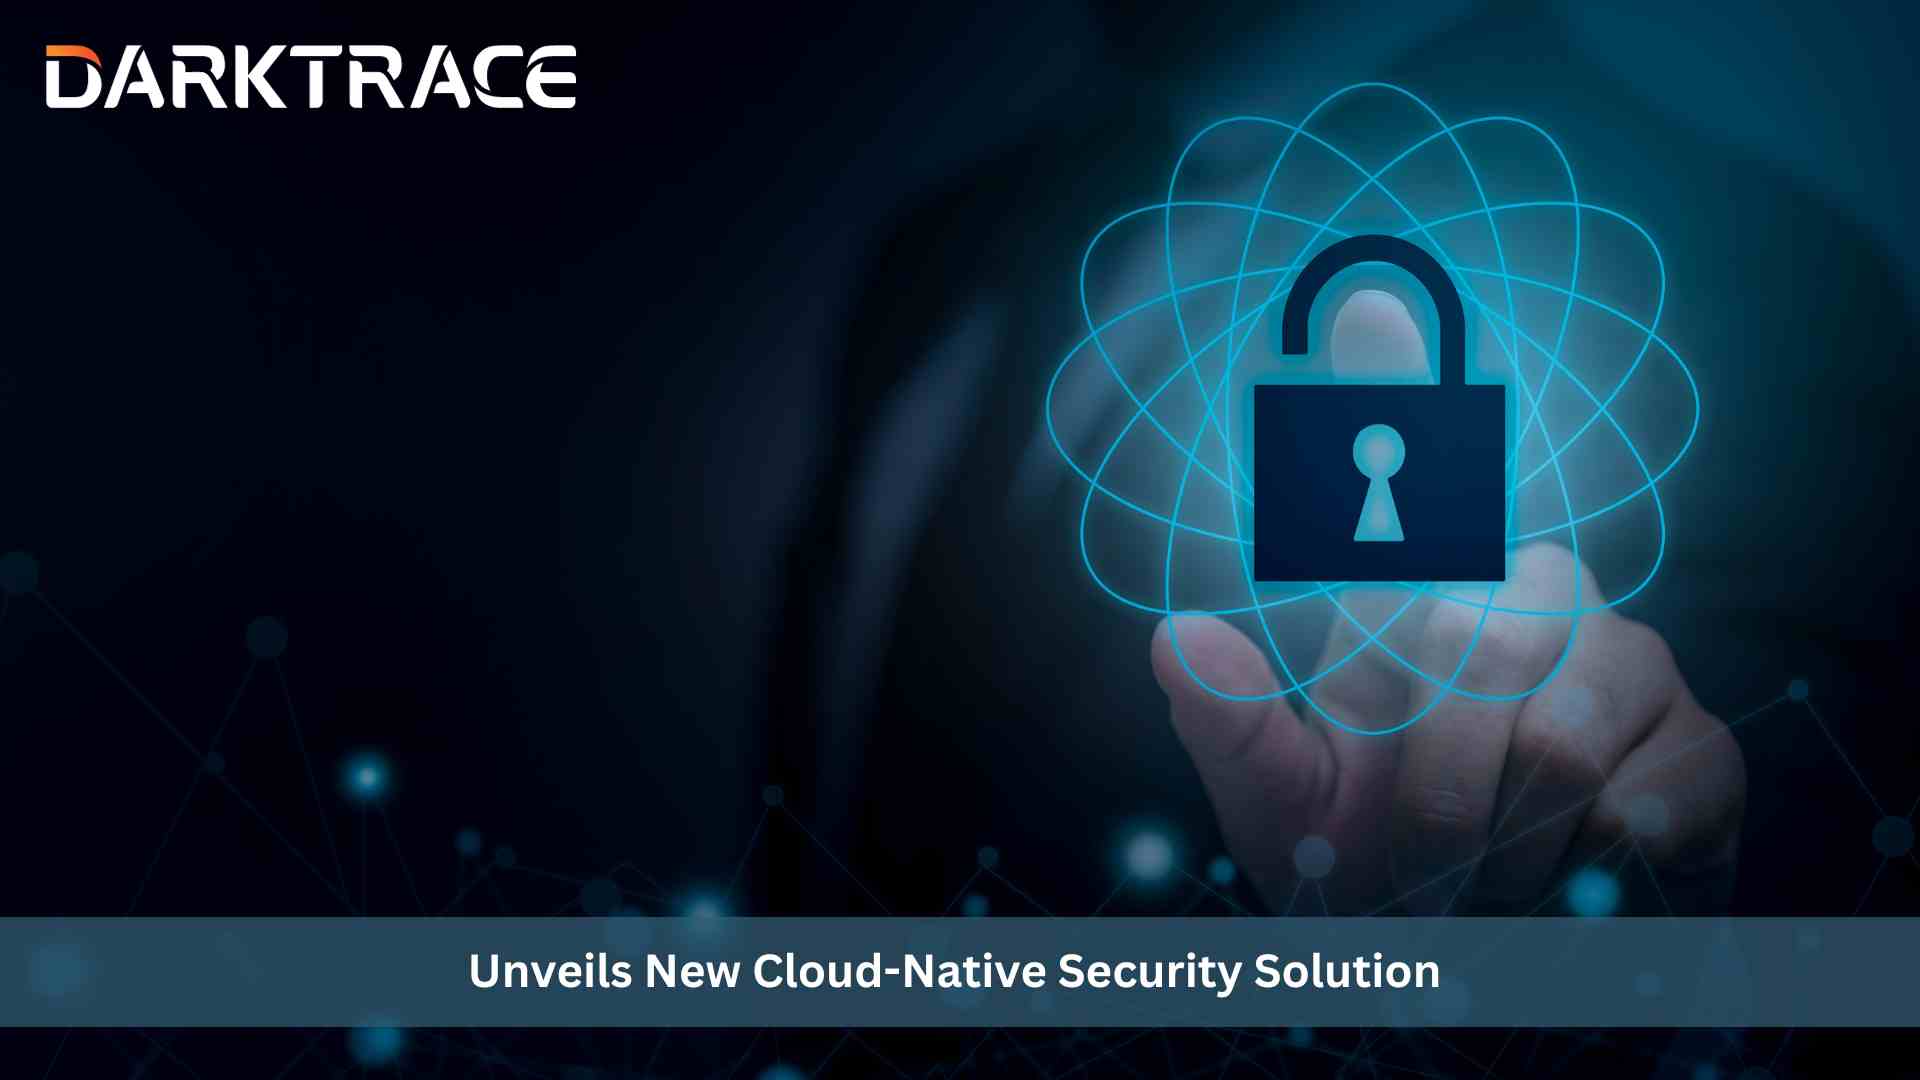 Darktrace Unveils New Cloud-Native Security Solution Using AI to Provide Real-Time Cyber Resilience for Cloud Environments